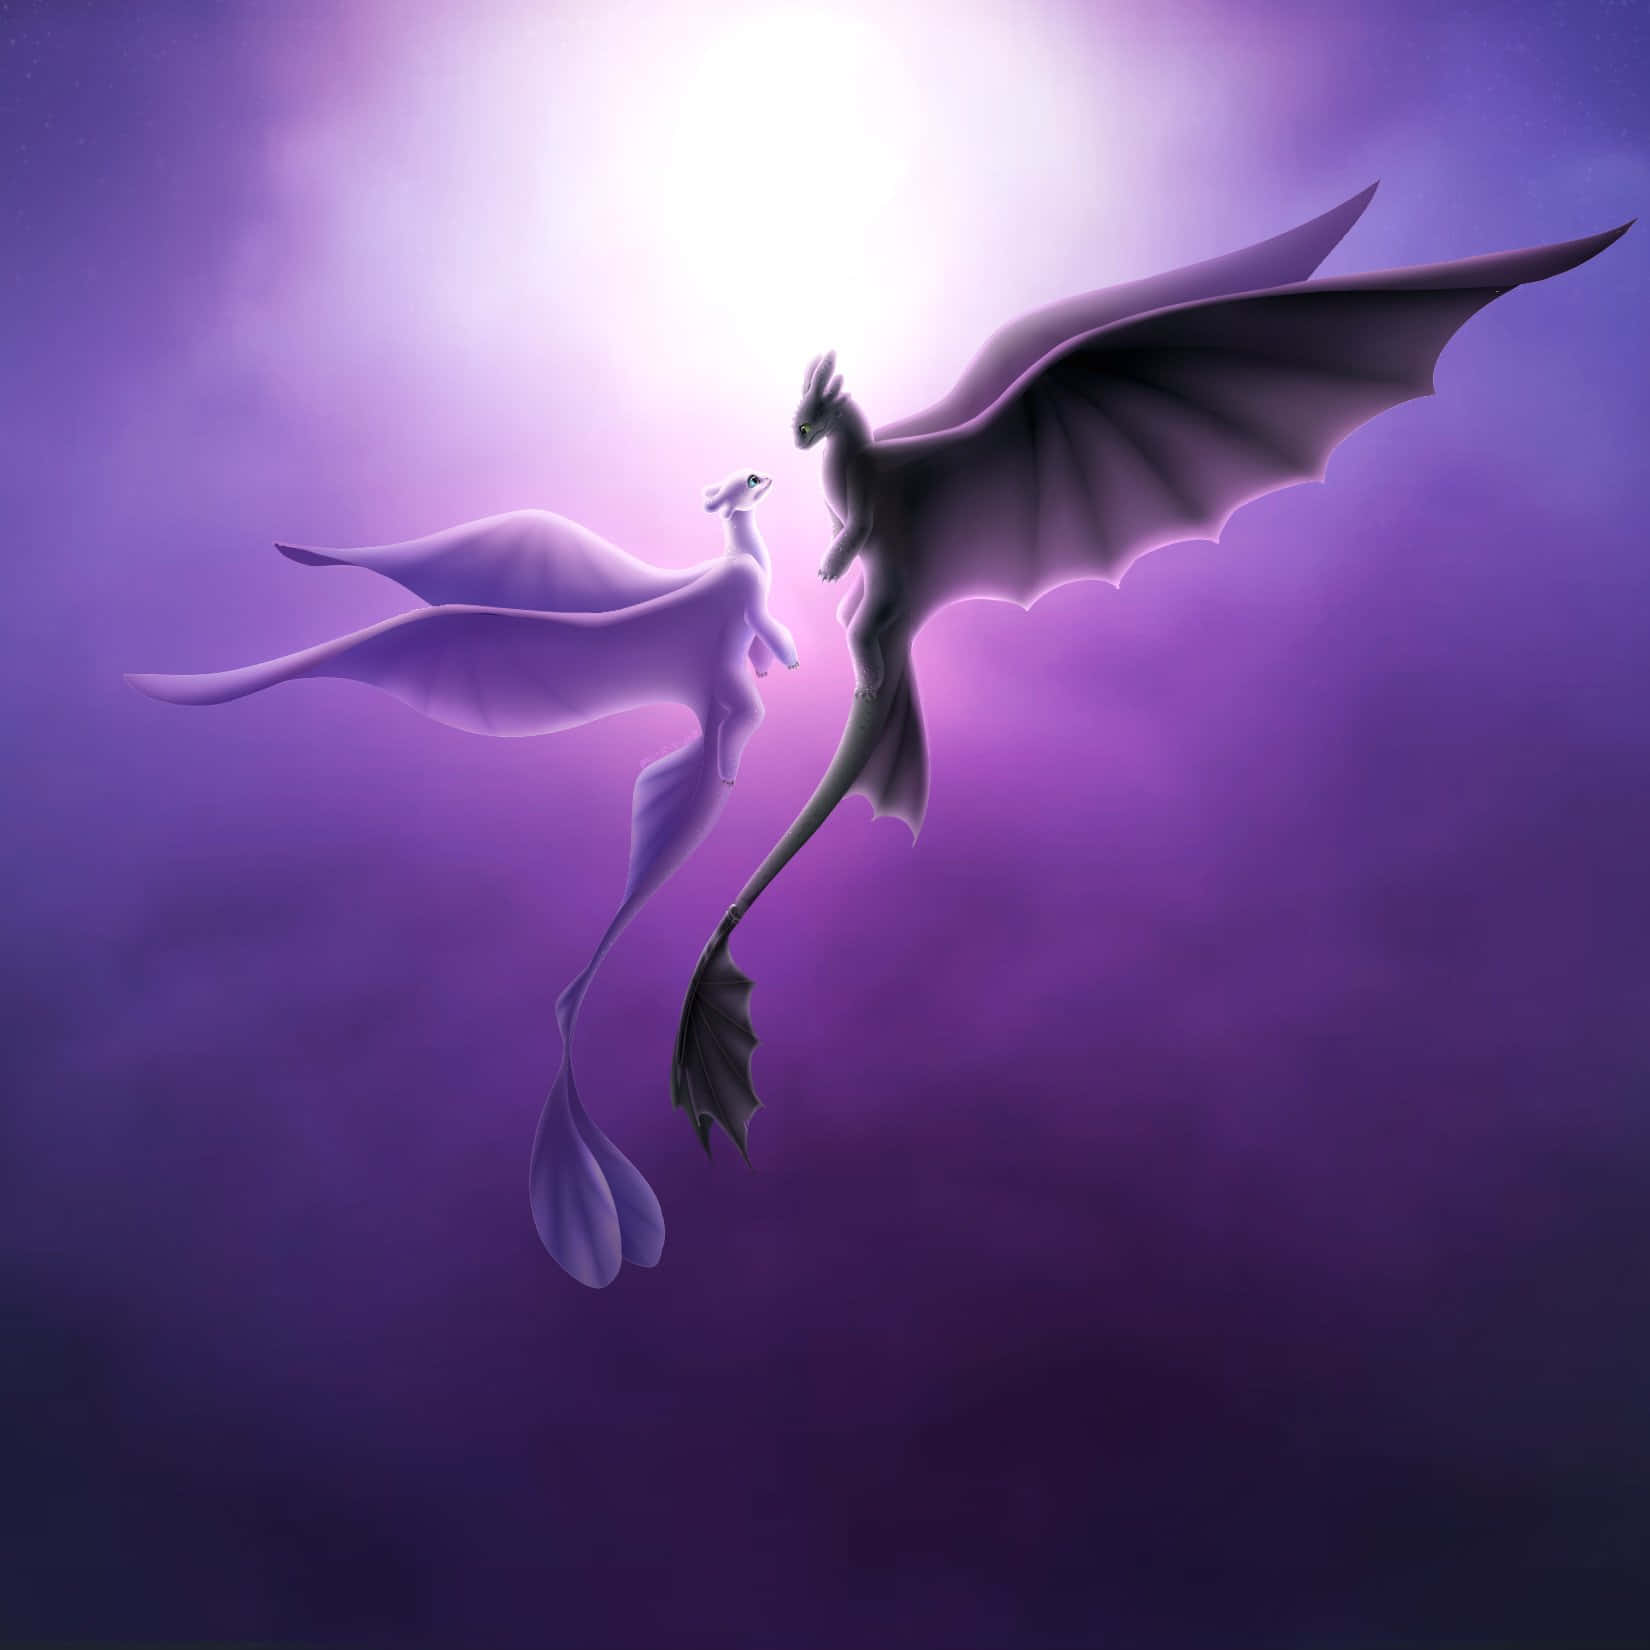 Take your breath away into the magnificent world of dragons with our Dragon Profile!